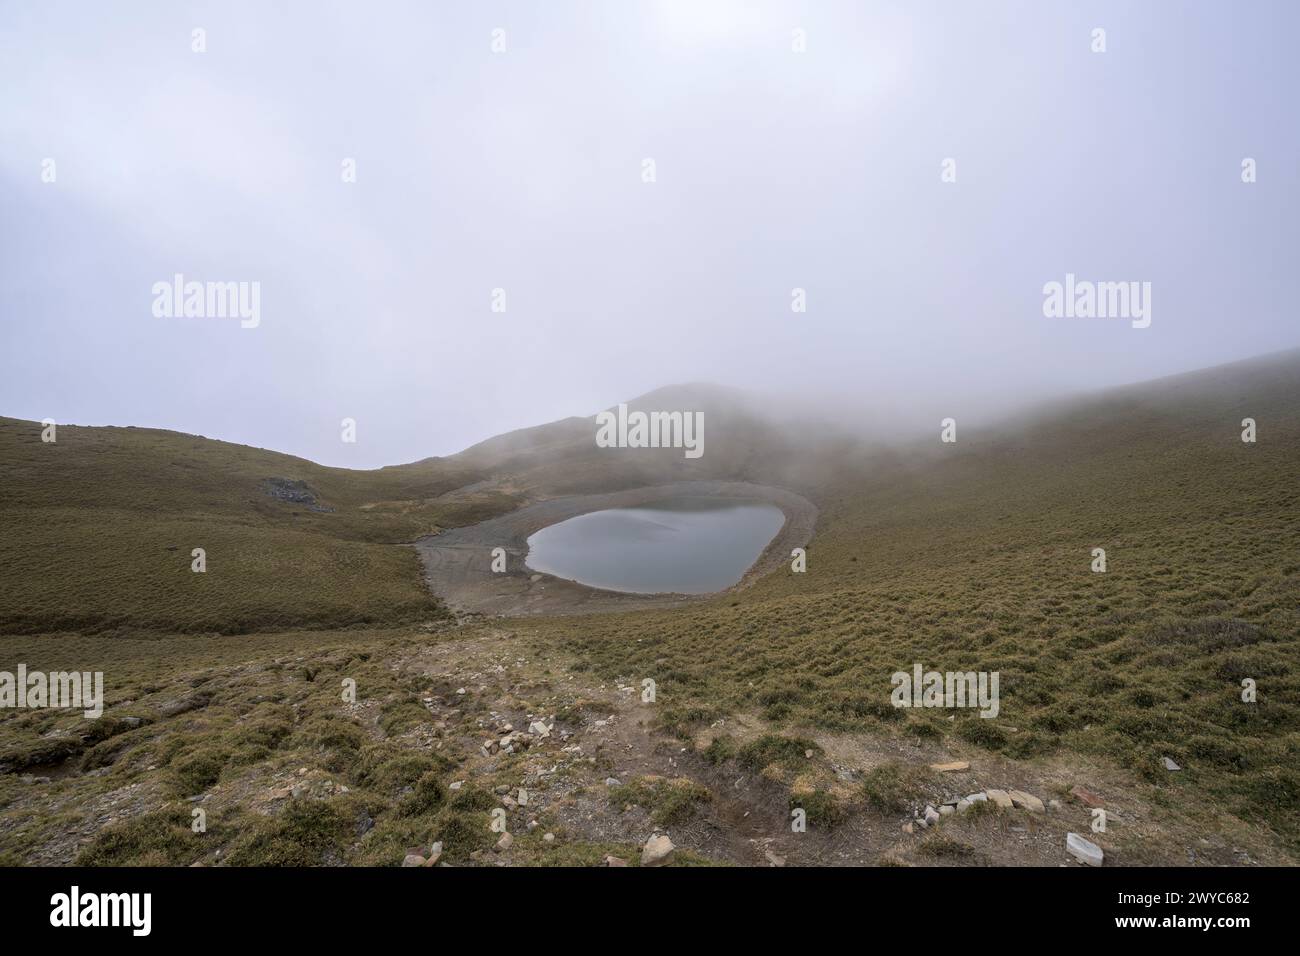 A serene Jiaming Lake nestled in mountains, shrouded in mist in wintertime Stock Photo